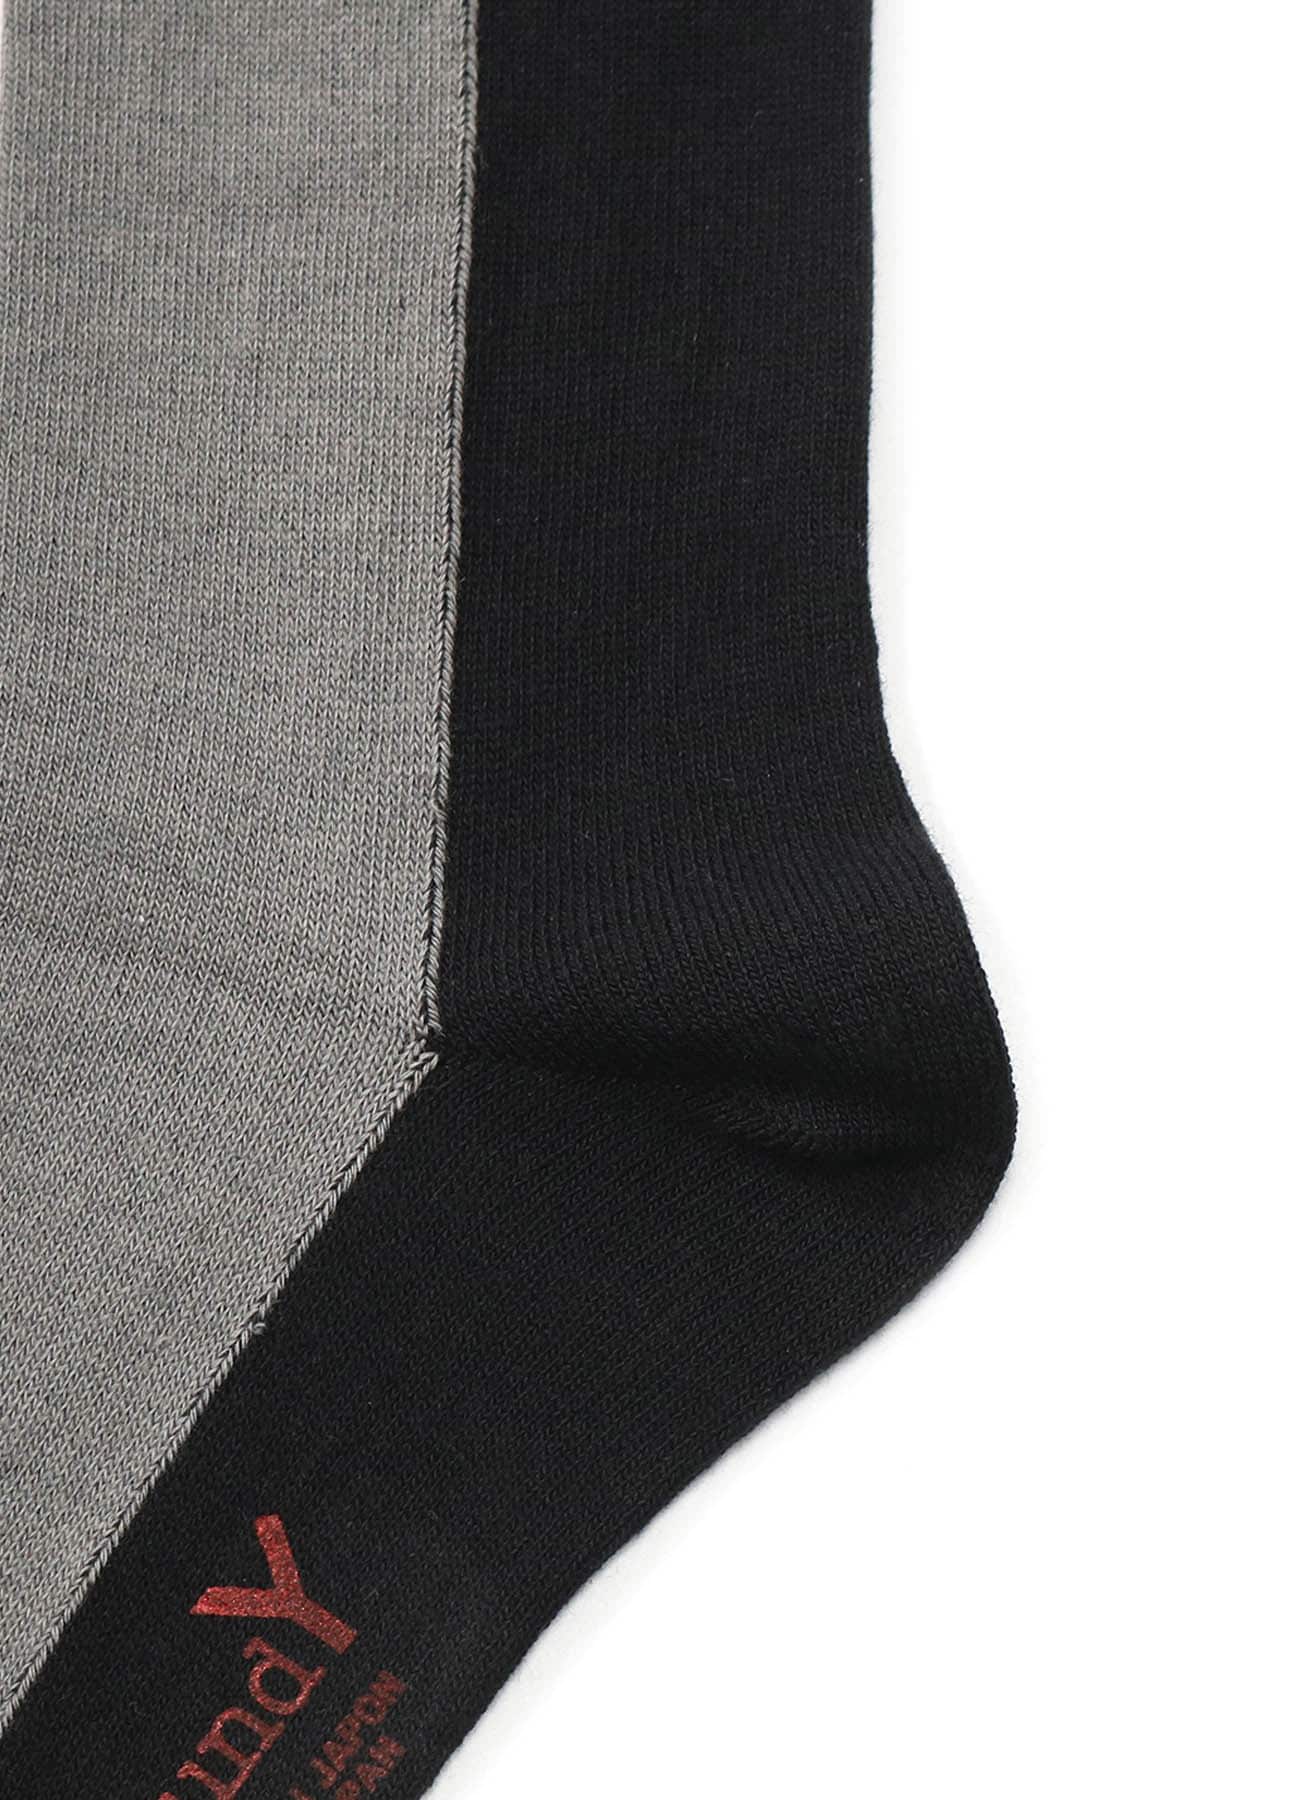 Front and Back Two Color Socks